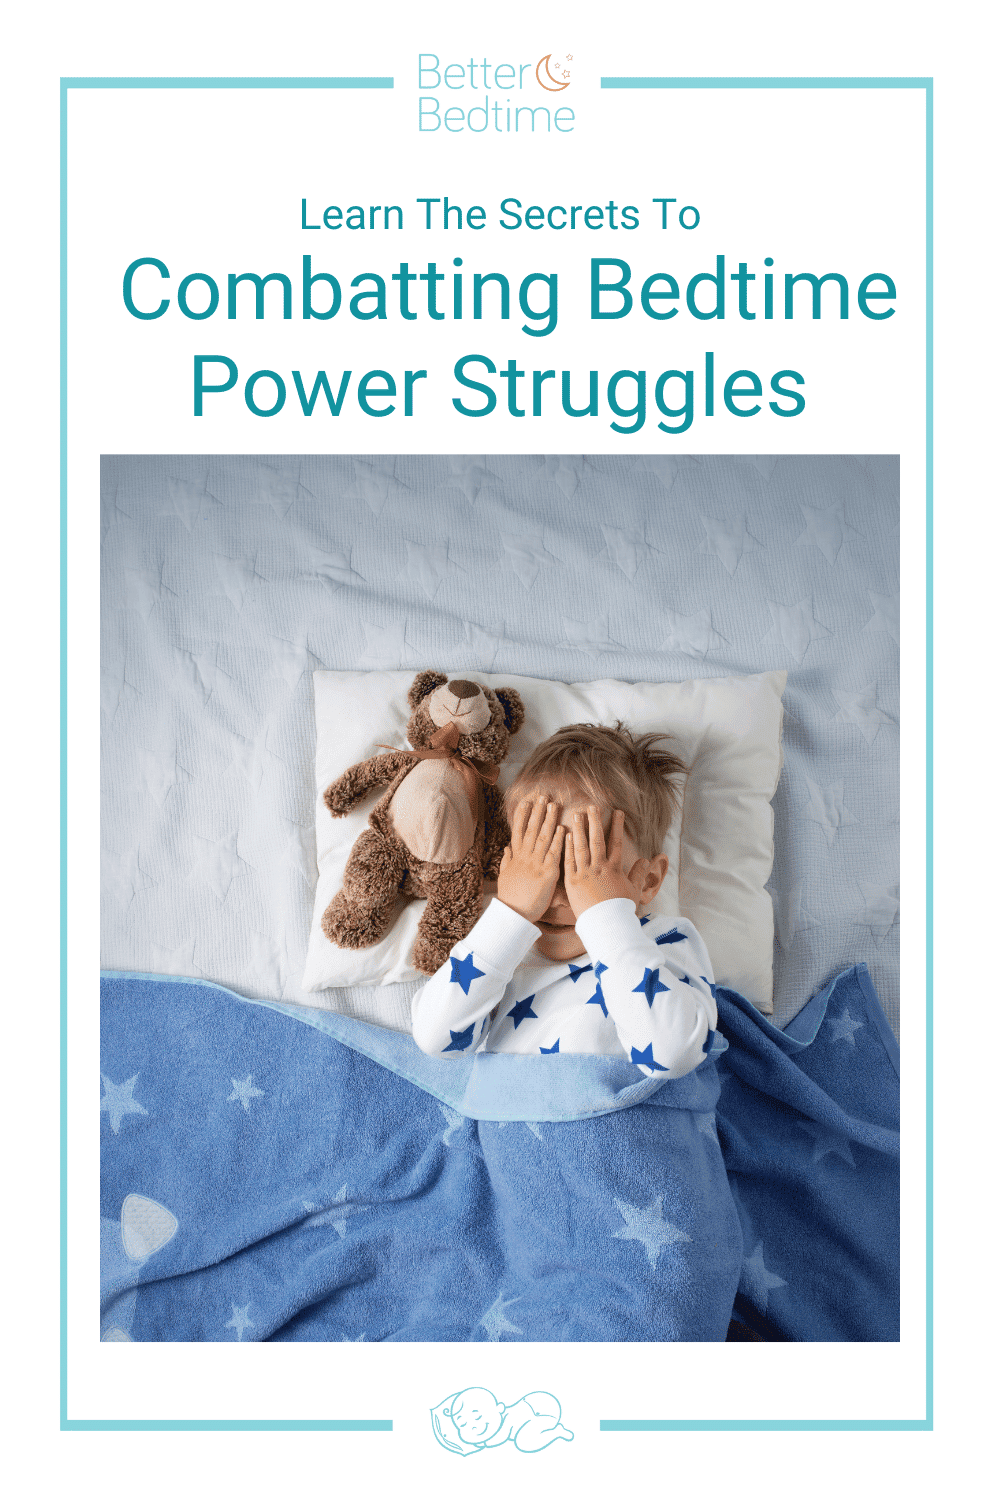 Learn The Secrets To Combatting Bedtime Power Struggles